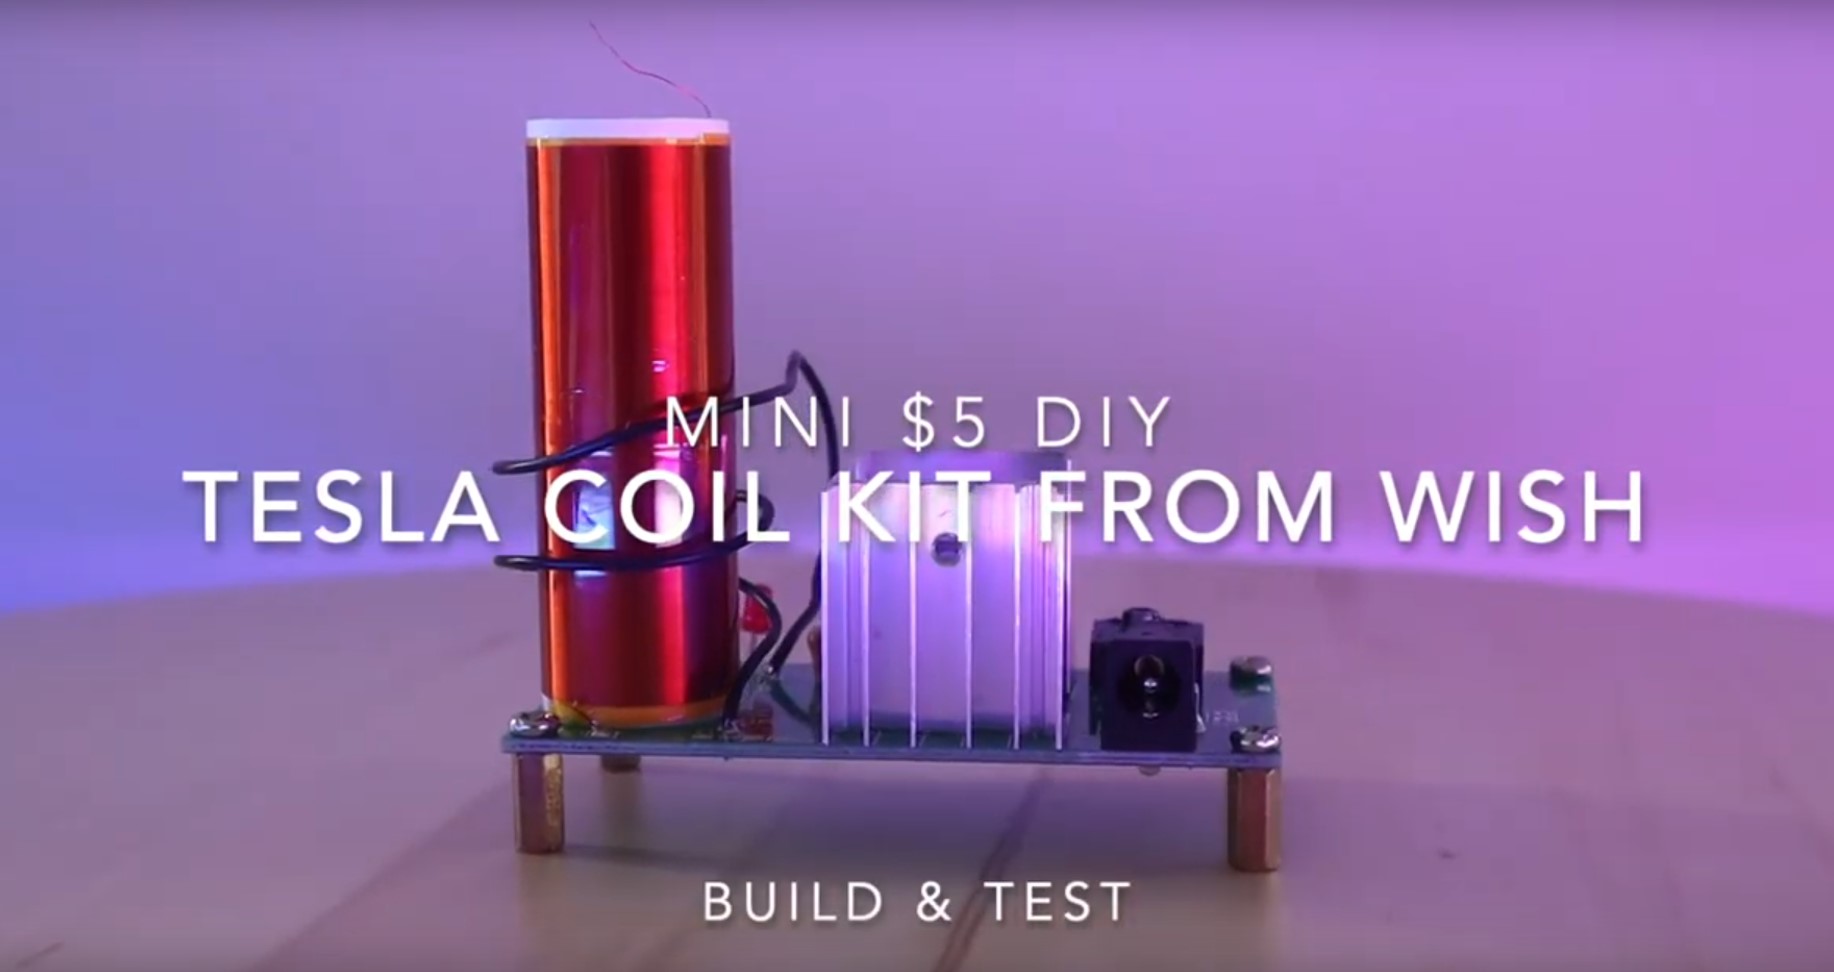 Building A $5 Mini Tesla Coil Kit From Wish - The DIY Life